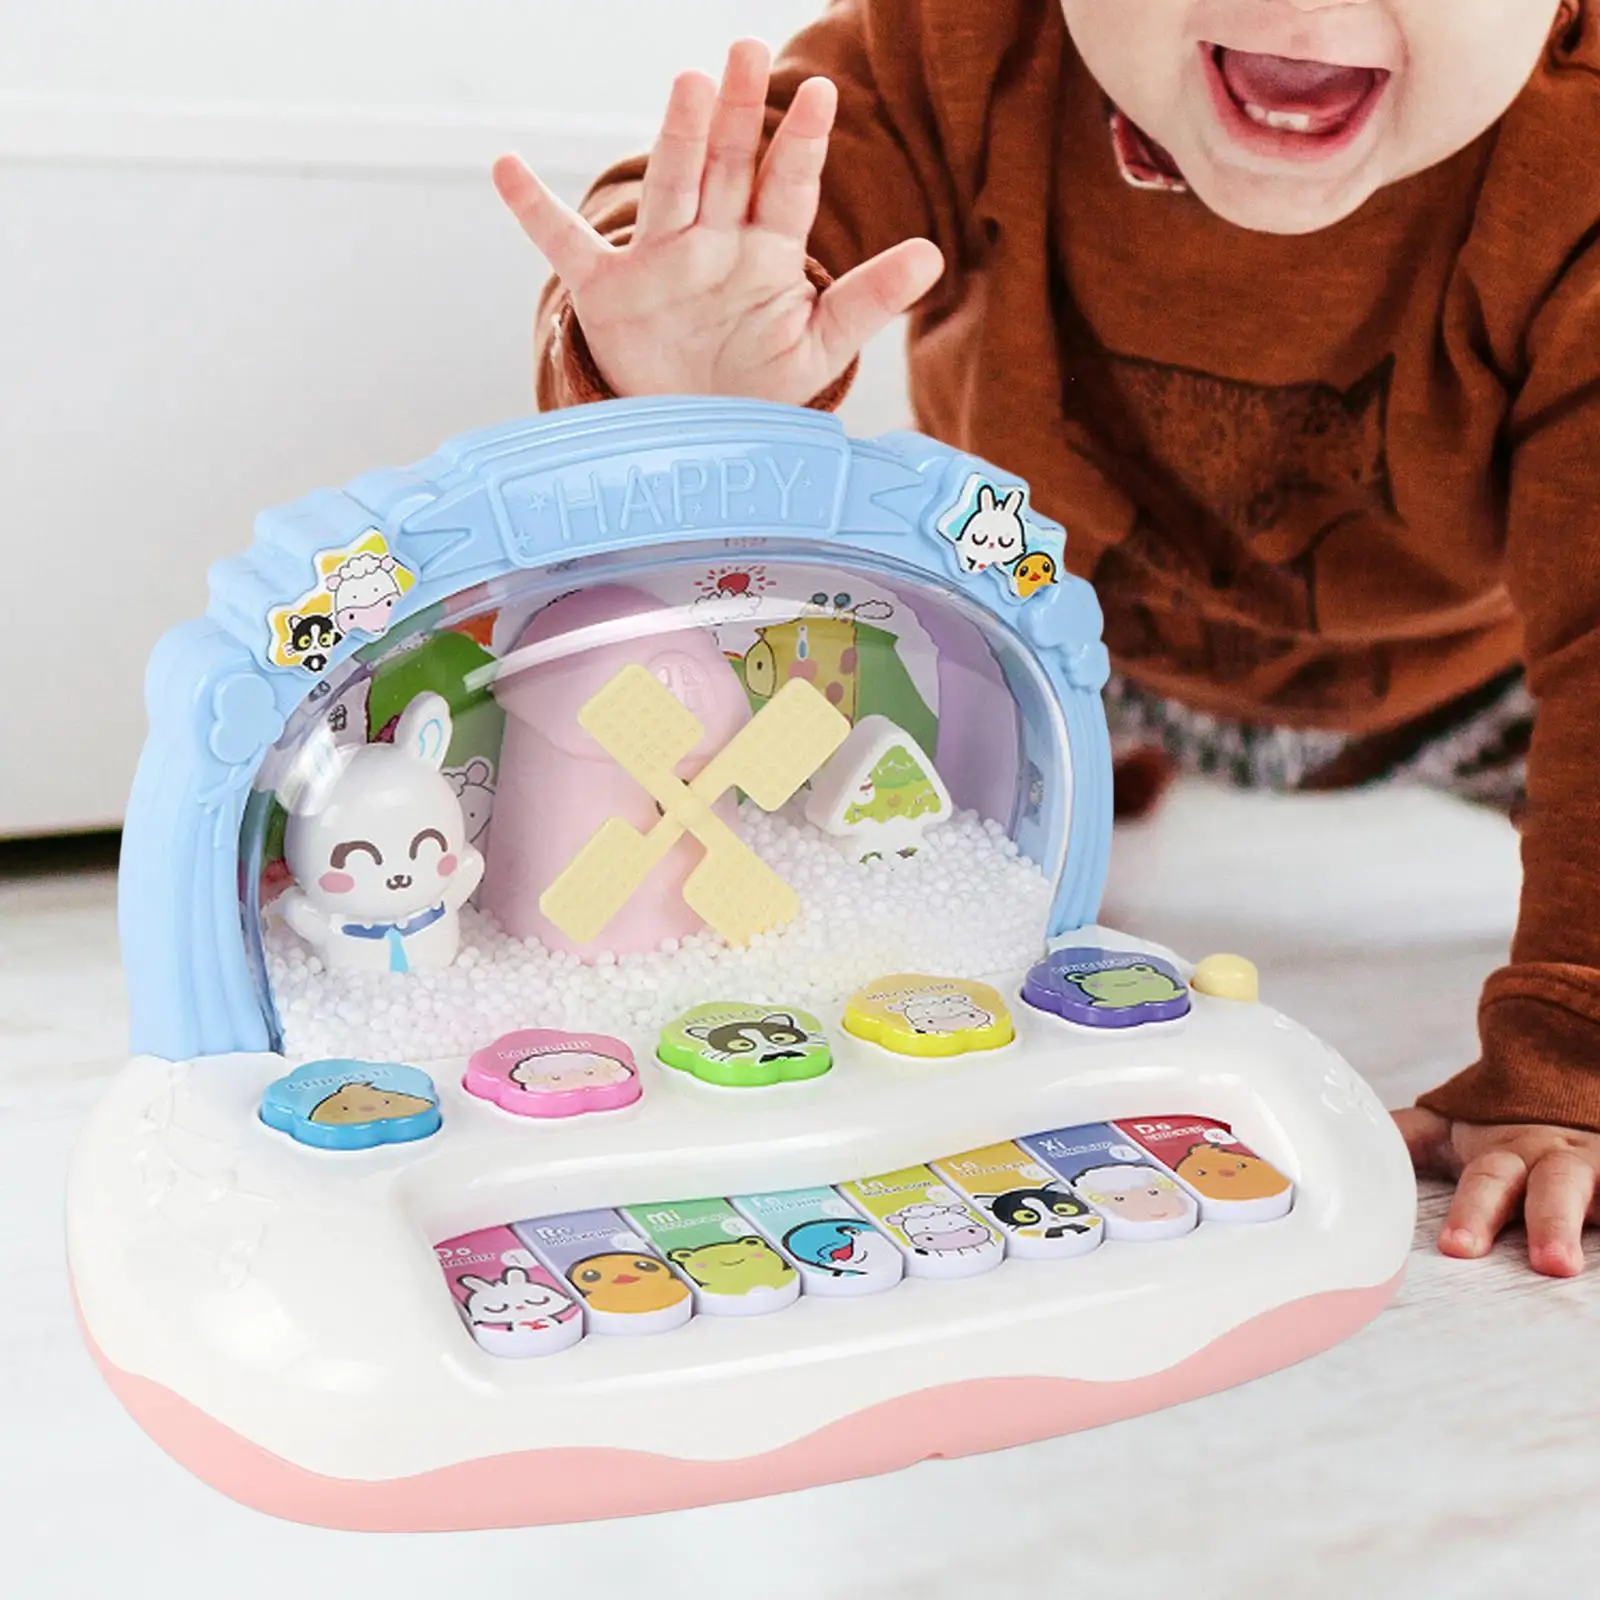 Musical Piano Toy Early Learning 8 Keys Entertainment Portable Piano Plays Music for Kids Baby Ages 2+ Birthday Gift Boys Girls